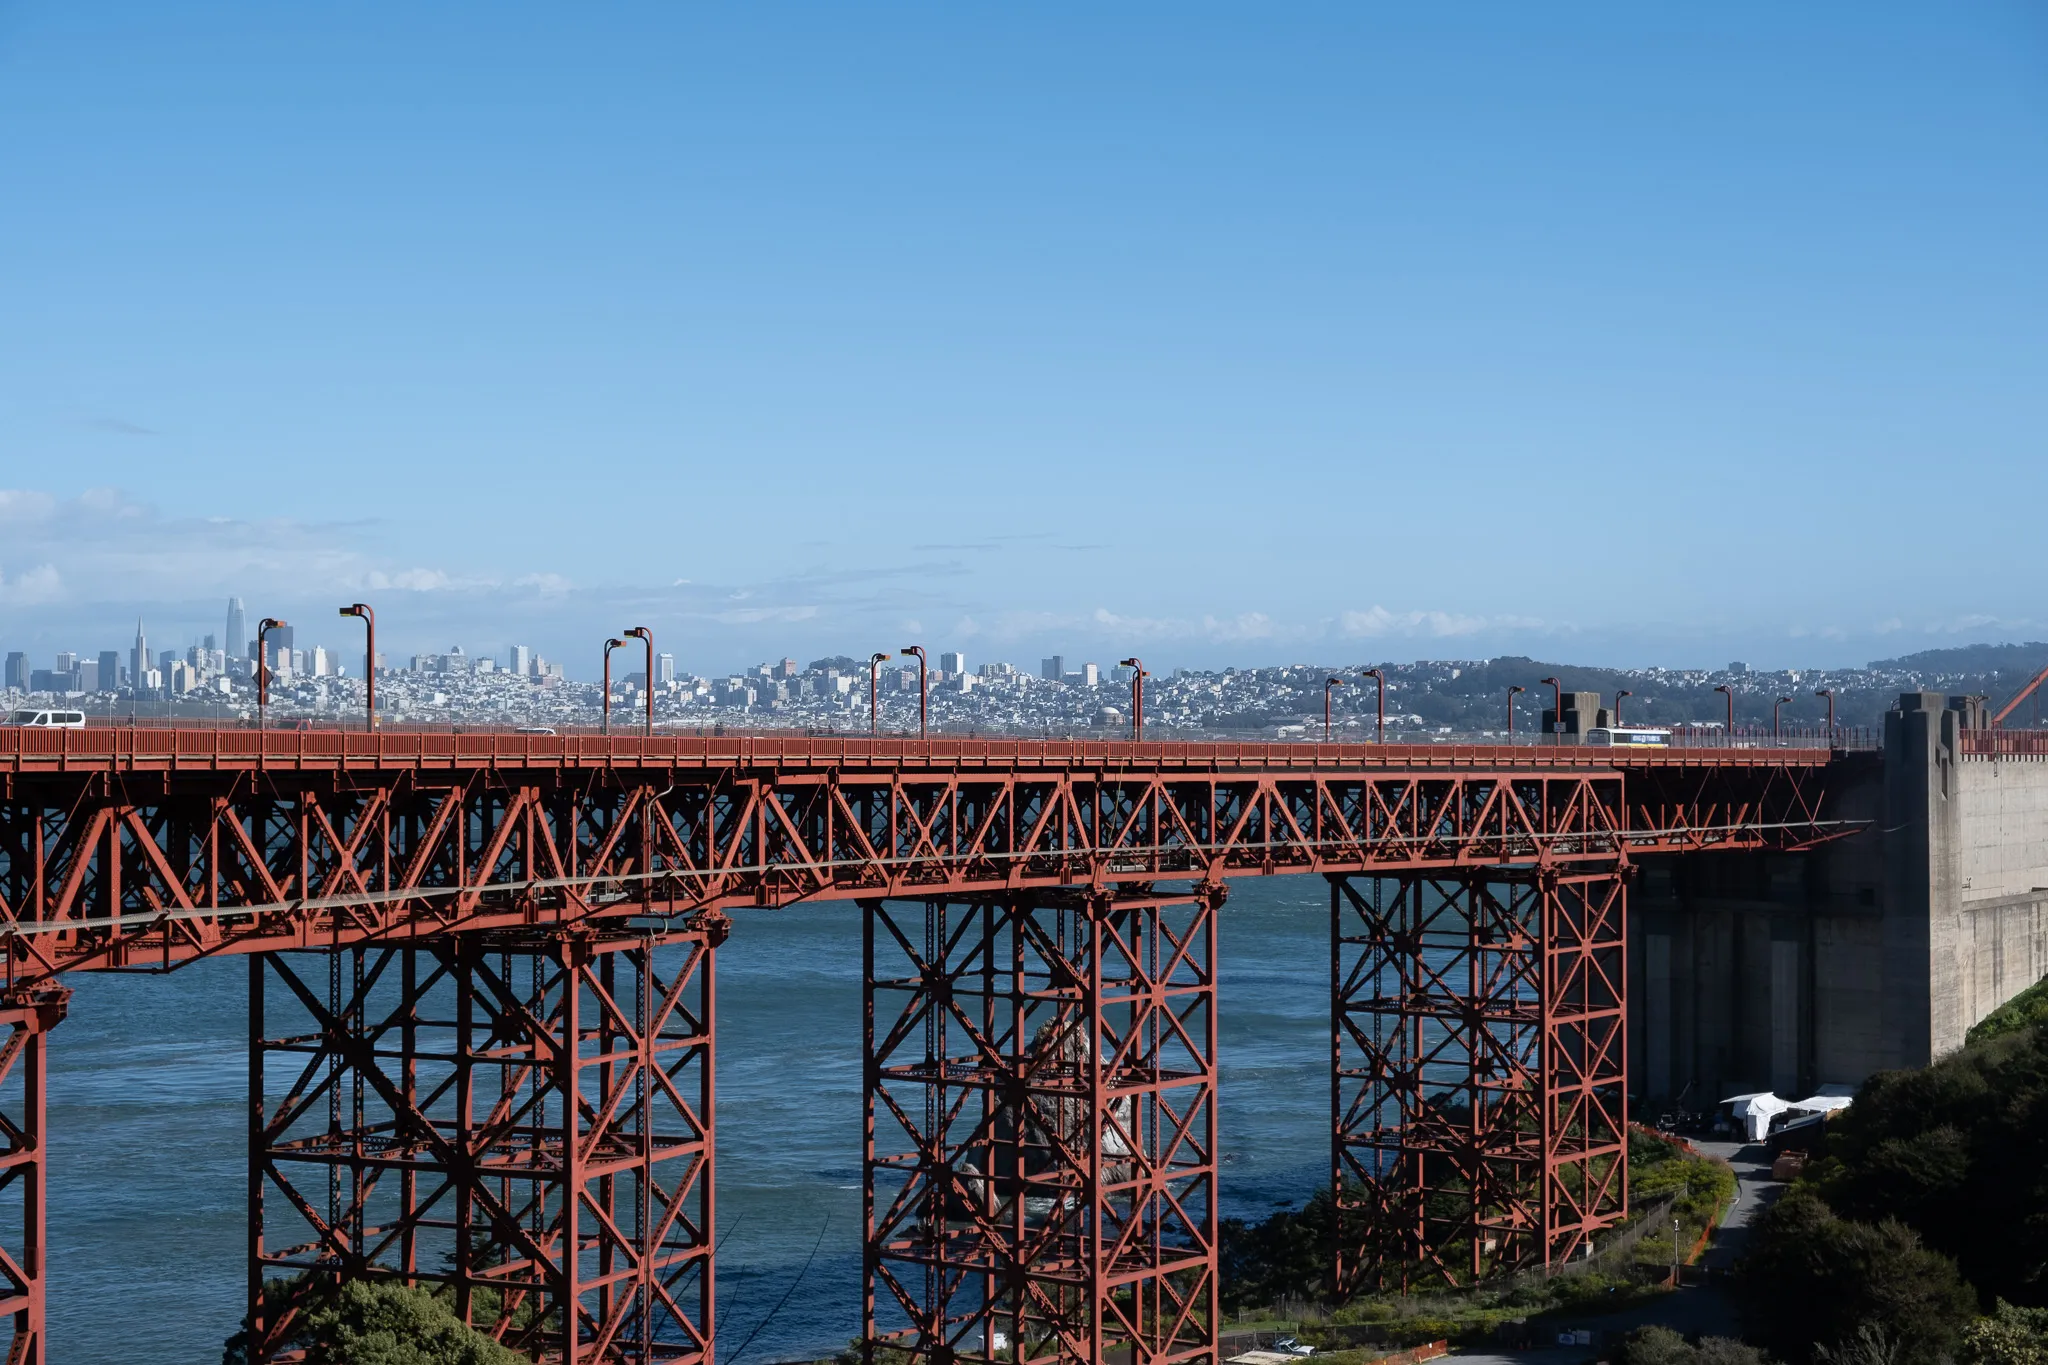 The understructure of the Golden Gate Bridge